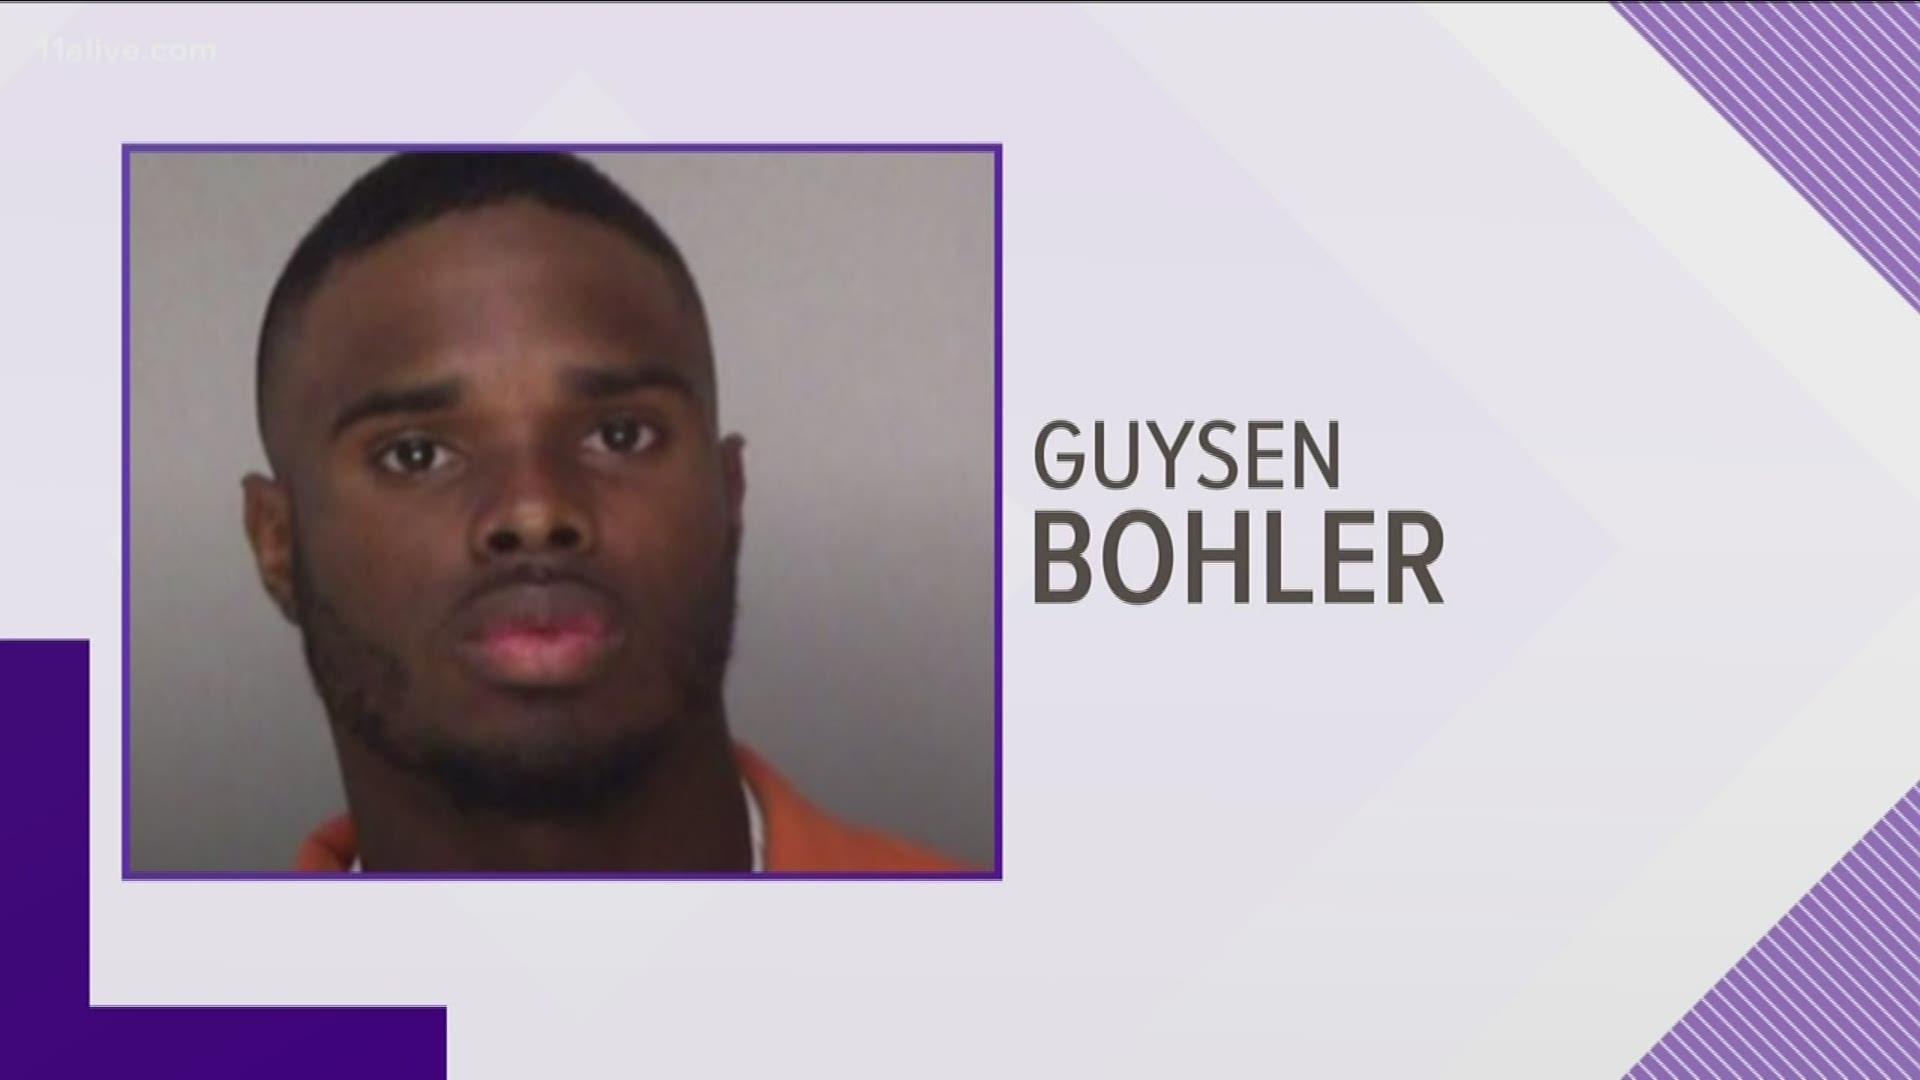 Guysen Bohler is accused of assaulting a student on campus.